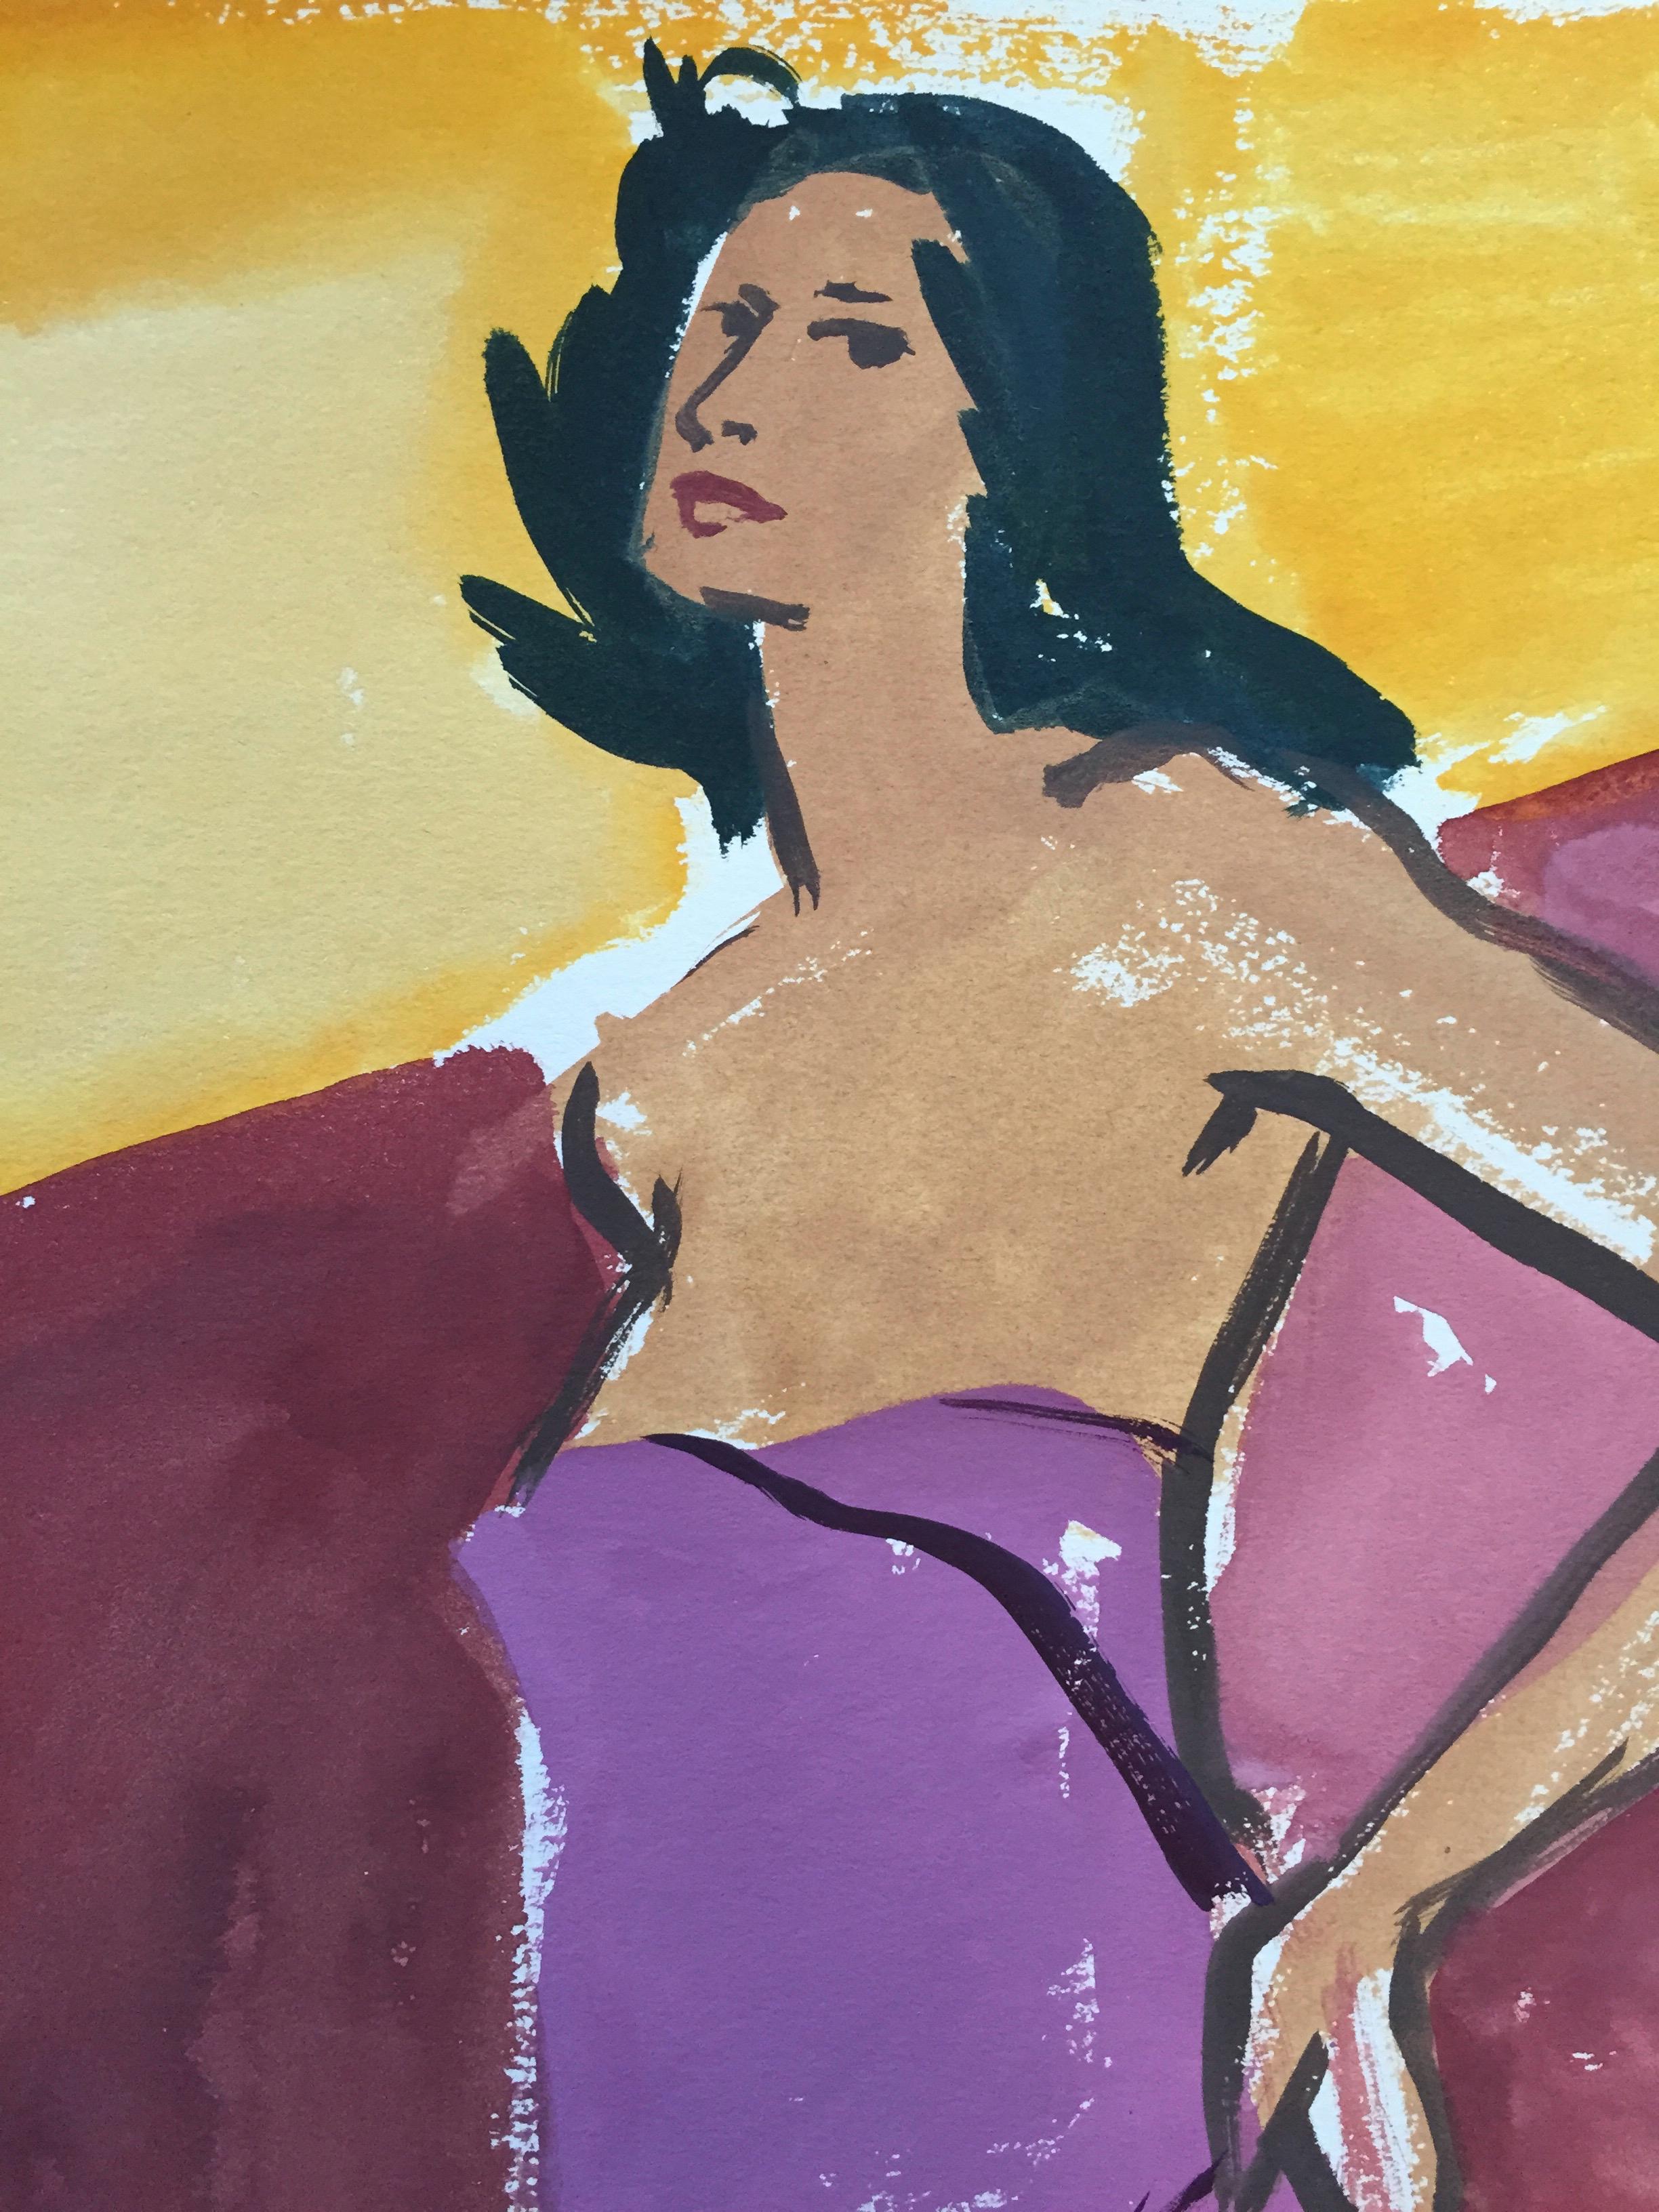 From the estate of Jerry Opper & Ruth Friedmann Opper
Pink Towel
c. 1940-1950's
Gouache on Paper
15